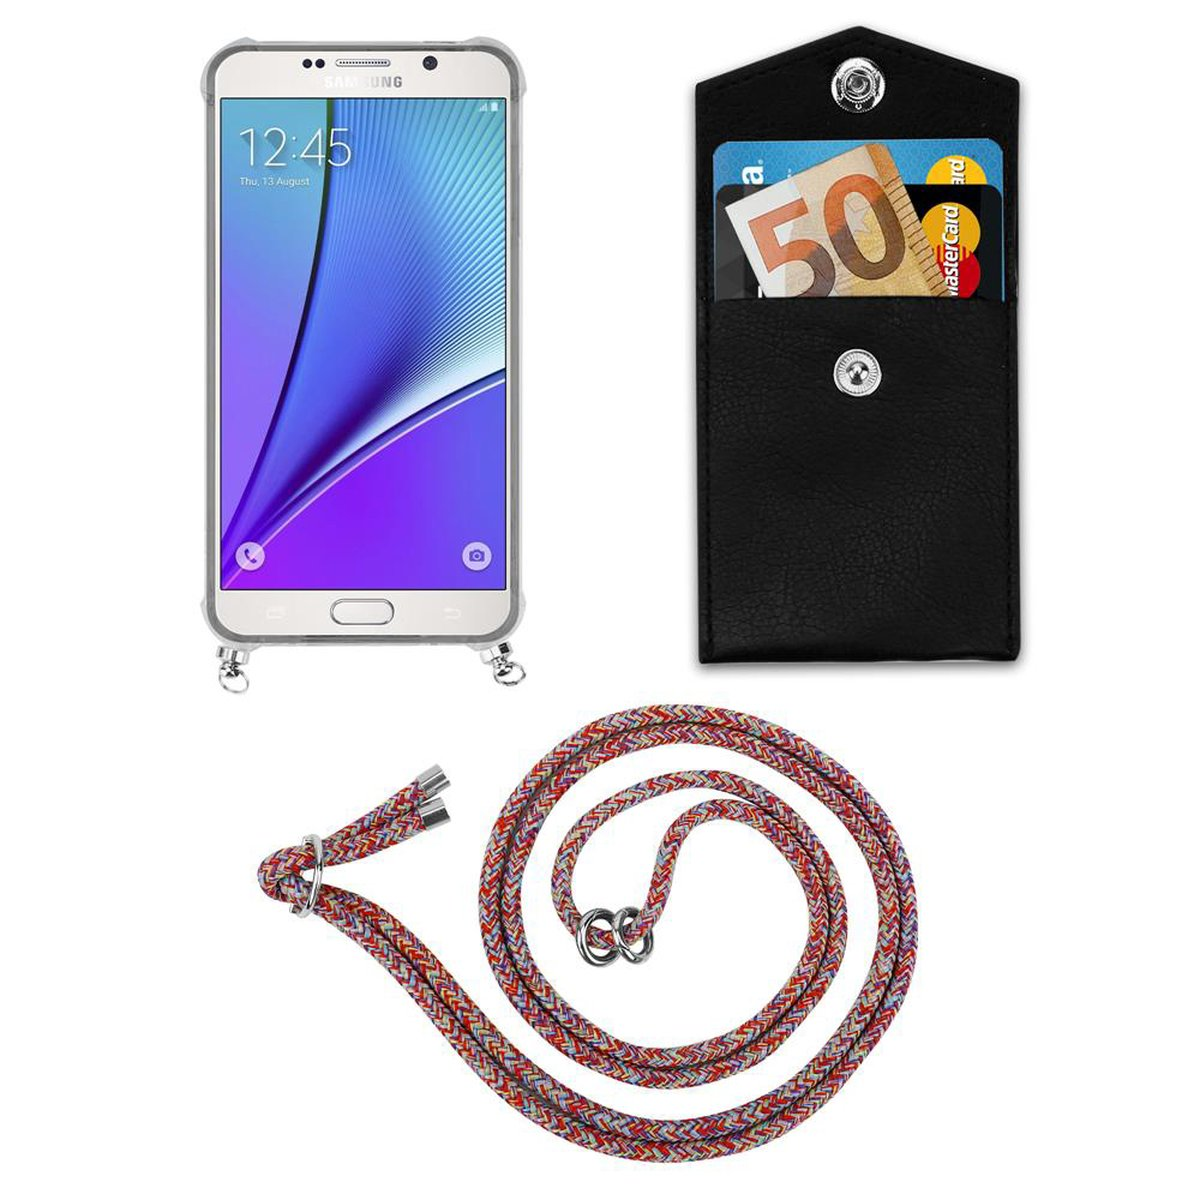 mit CADORABO COLORFUL Band Galaxy Ringen, Backcover, Silber und Kette NOTE Kordel 5, abnehmbarer Handy Hülle, Samsung, PARROT